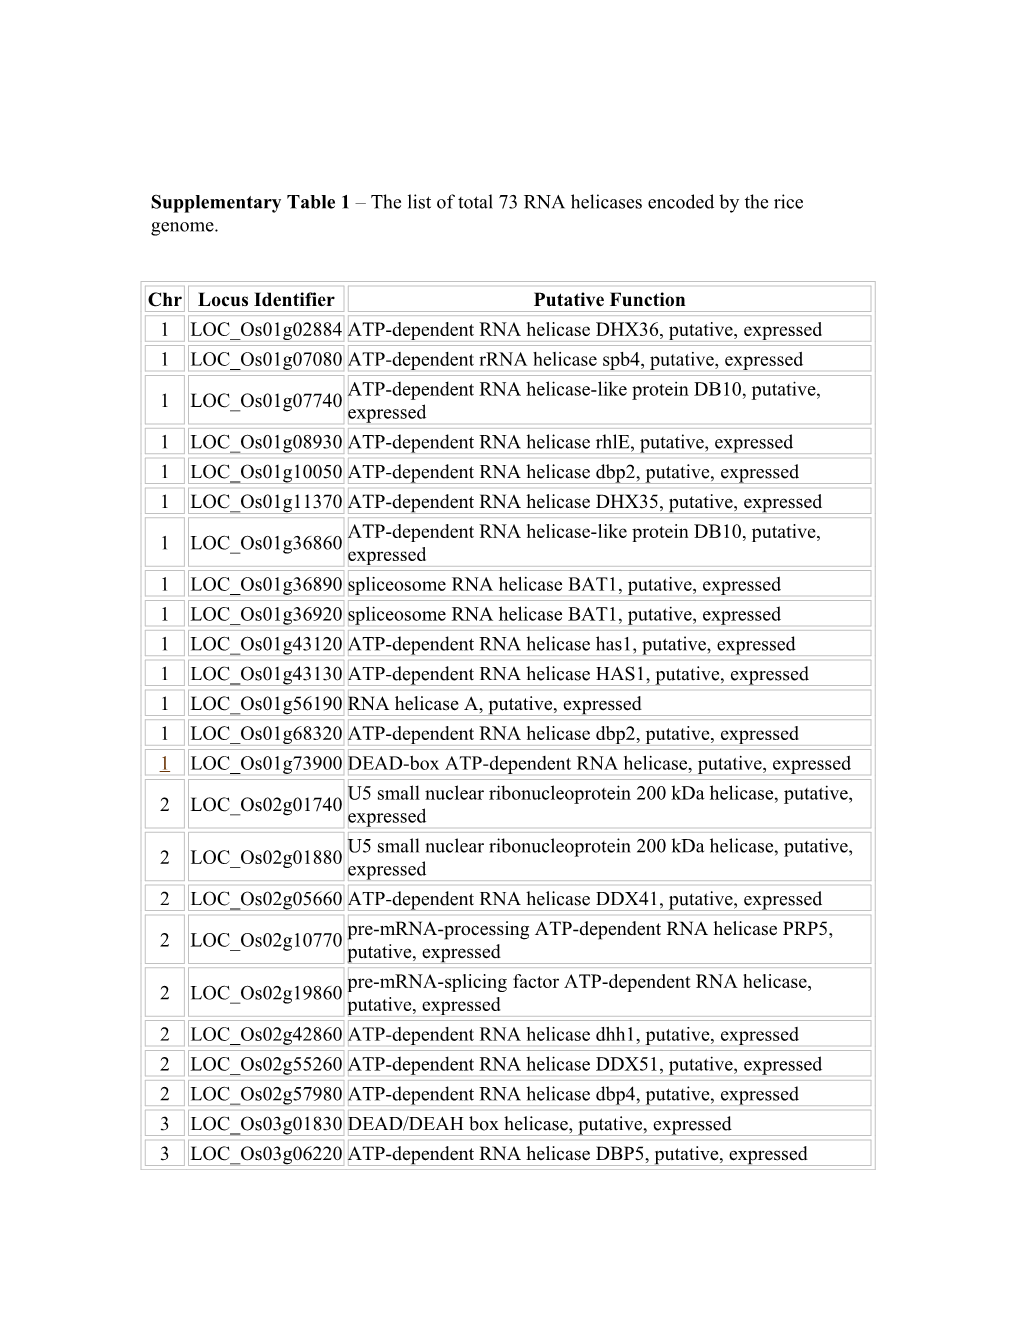 Supplementary Table 1 the List of Total 73 RNA Helicases Encoded by the Rice Genome